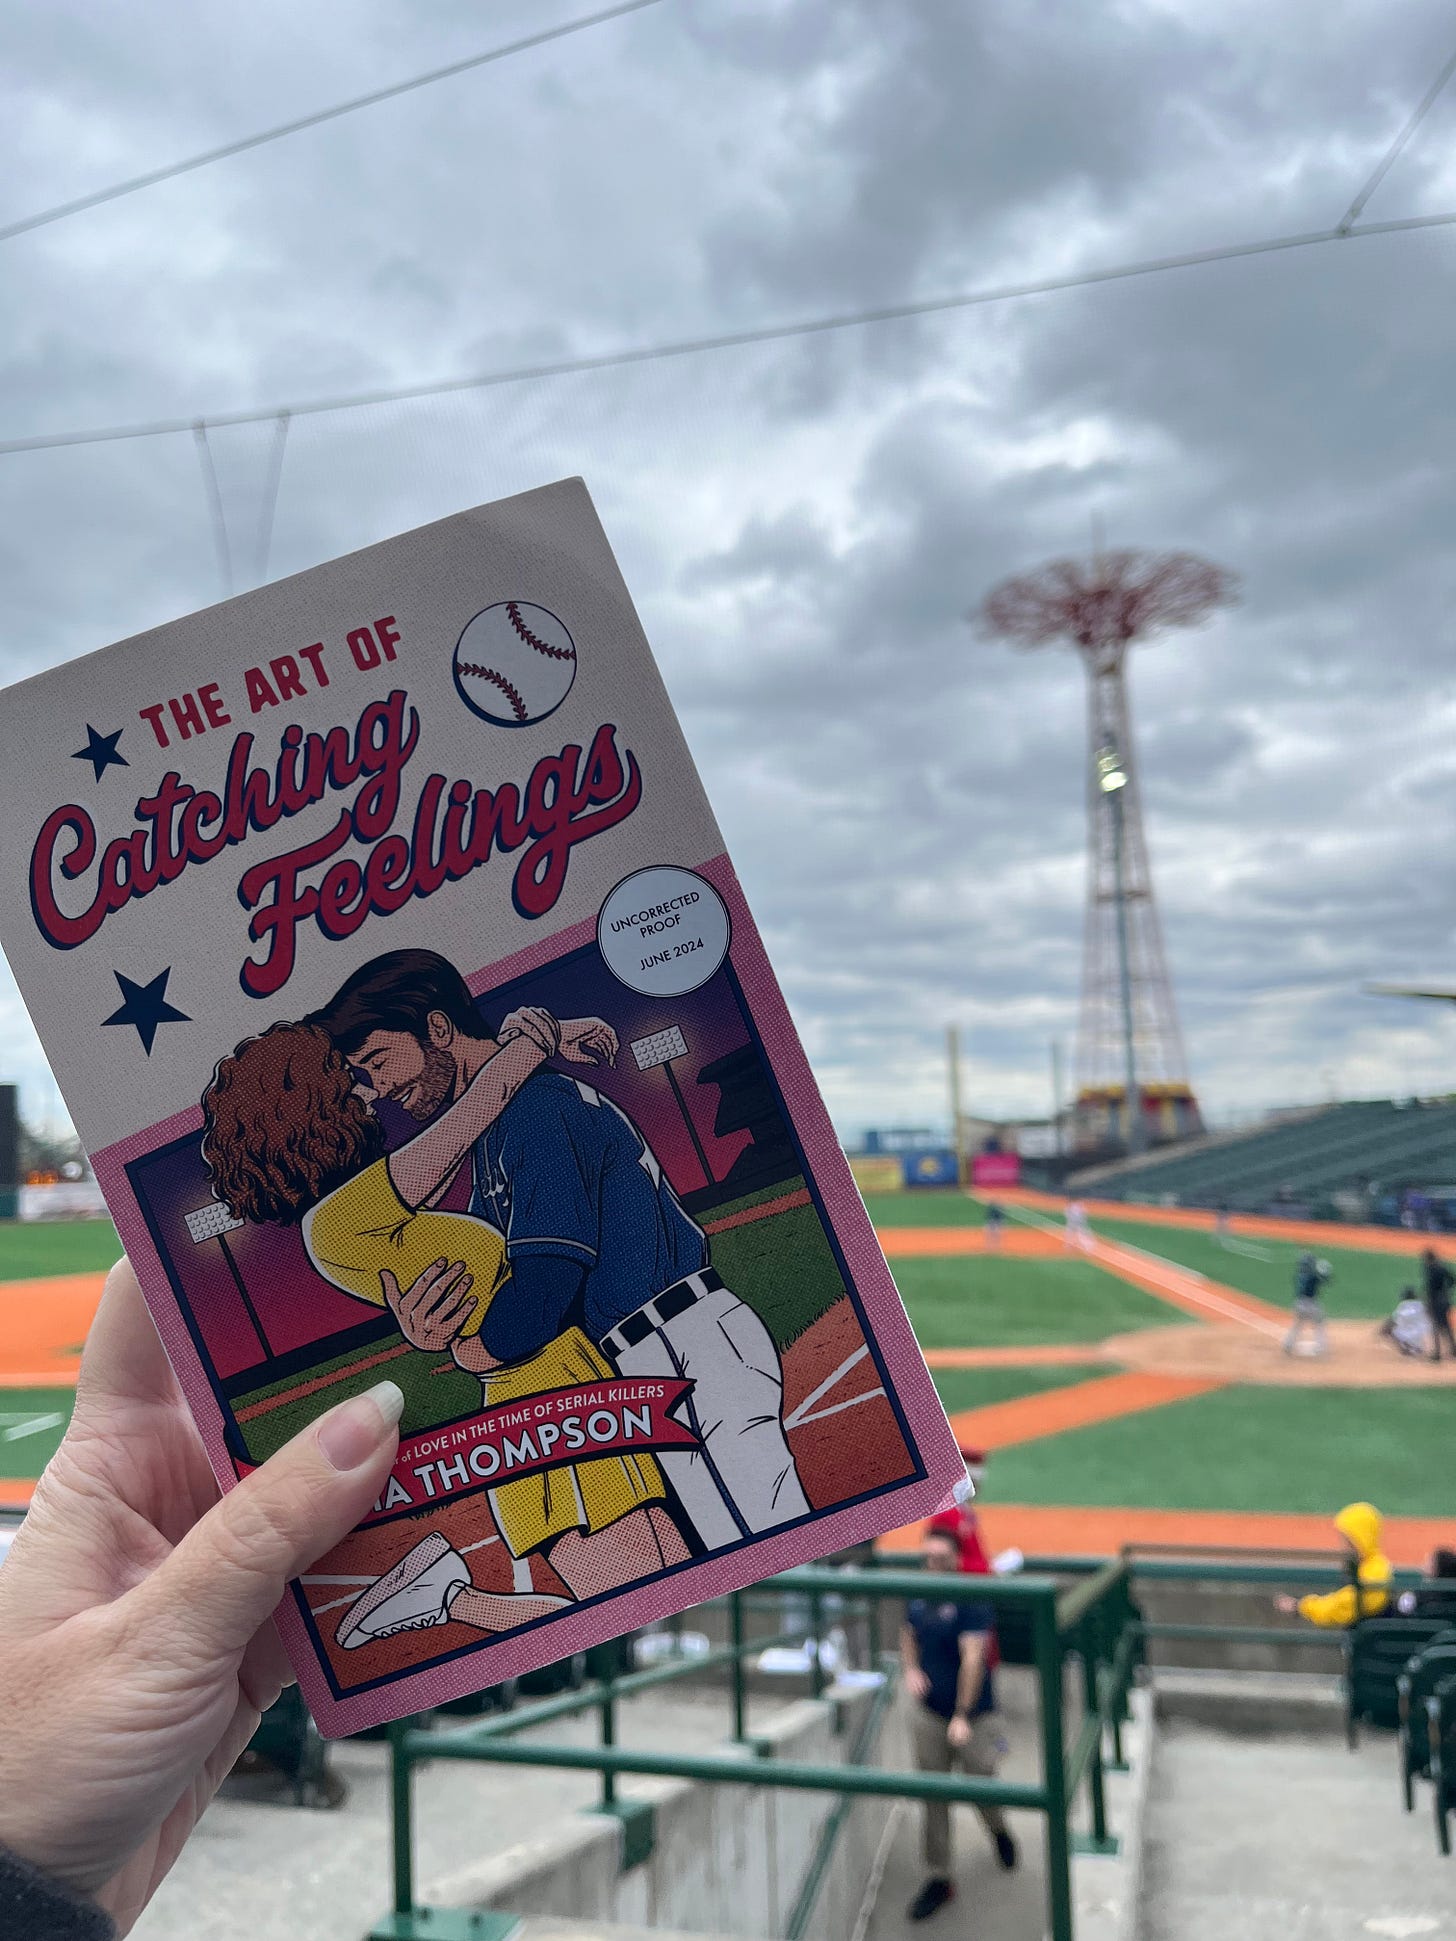 Picture of my hand holding up a copy of The Art of Catching Feelings in front of the Brooklyn Cyclones Game